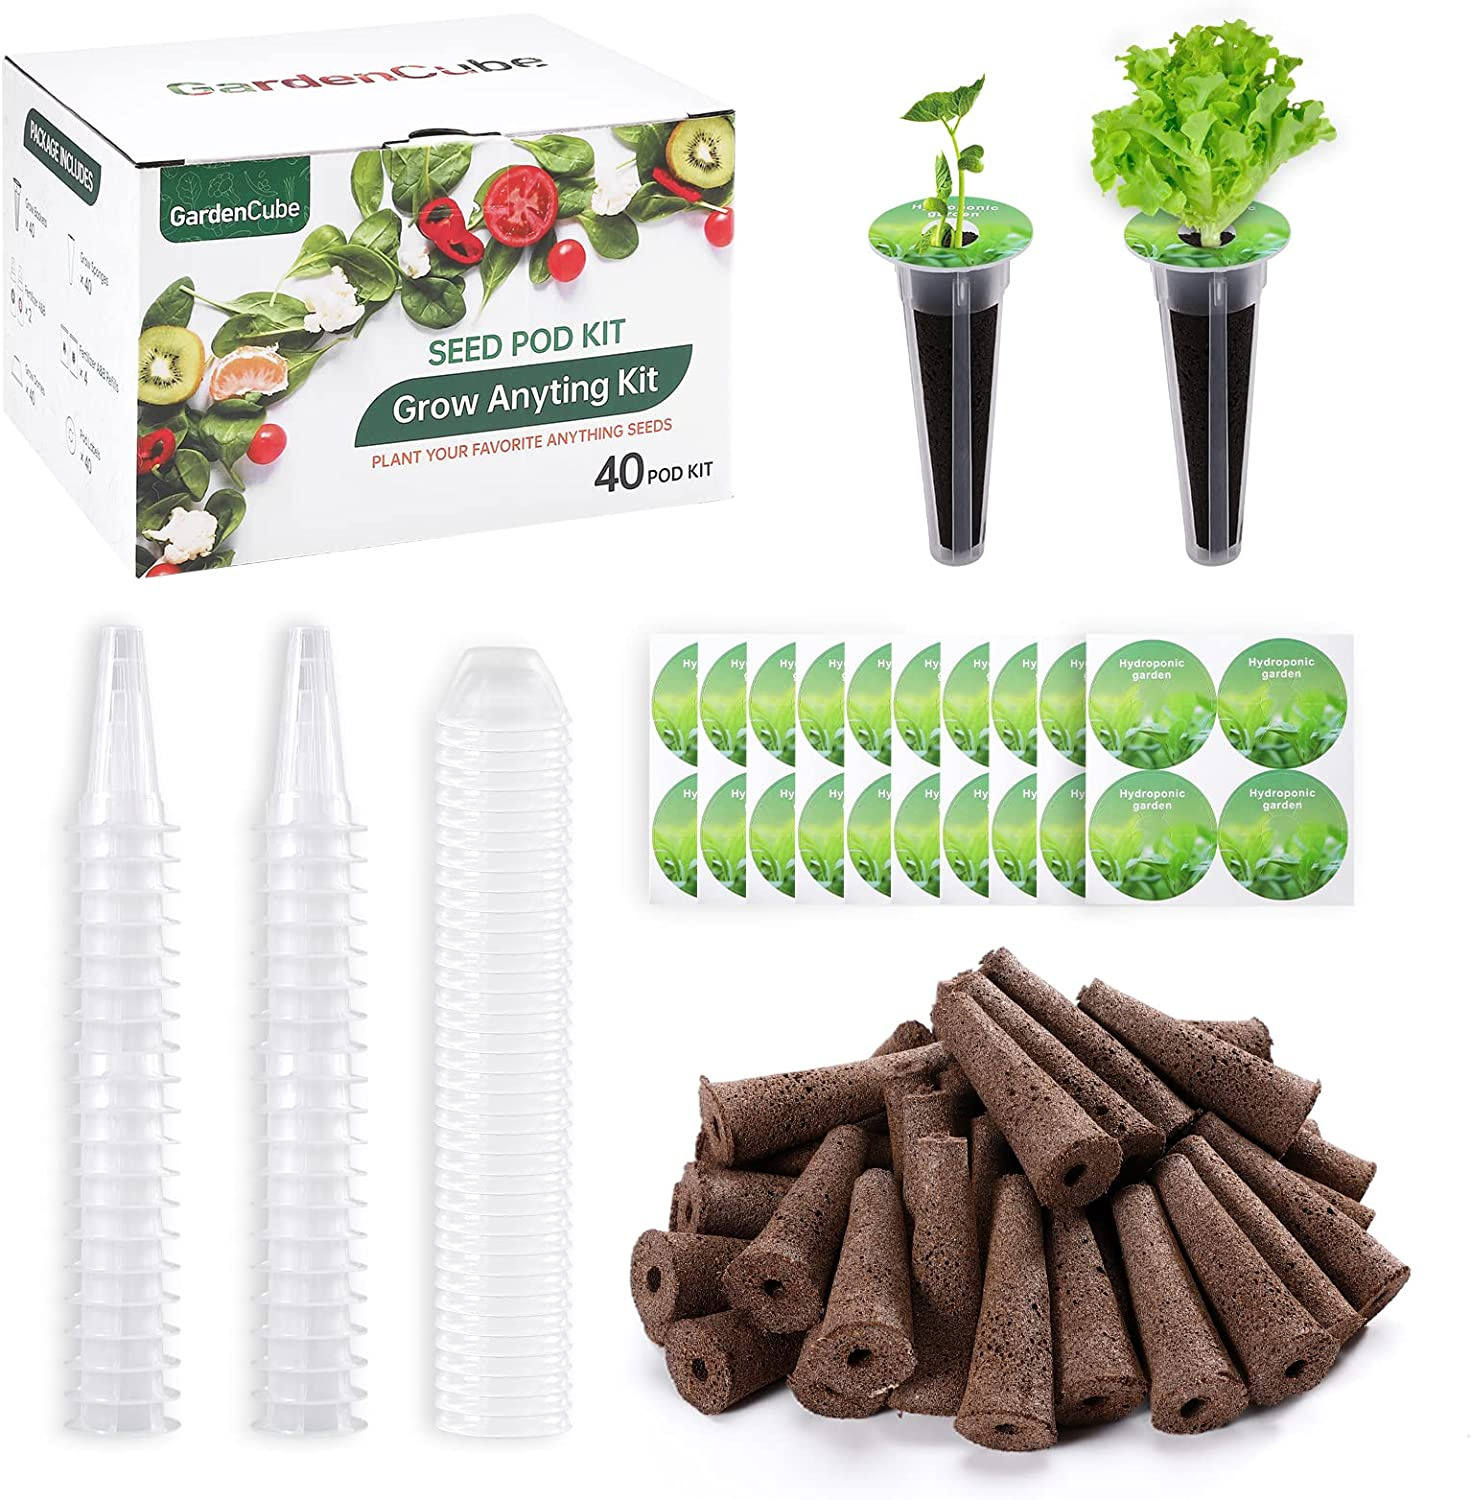 Gardencube 160Pcs Hydroponic Pods Kit: Grow Anything Kit with 40 Grow Sponges, 4